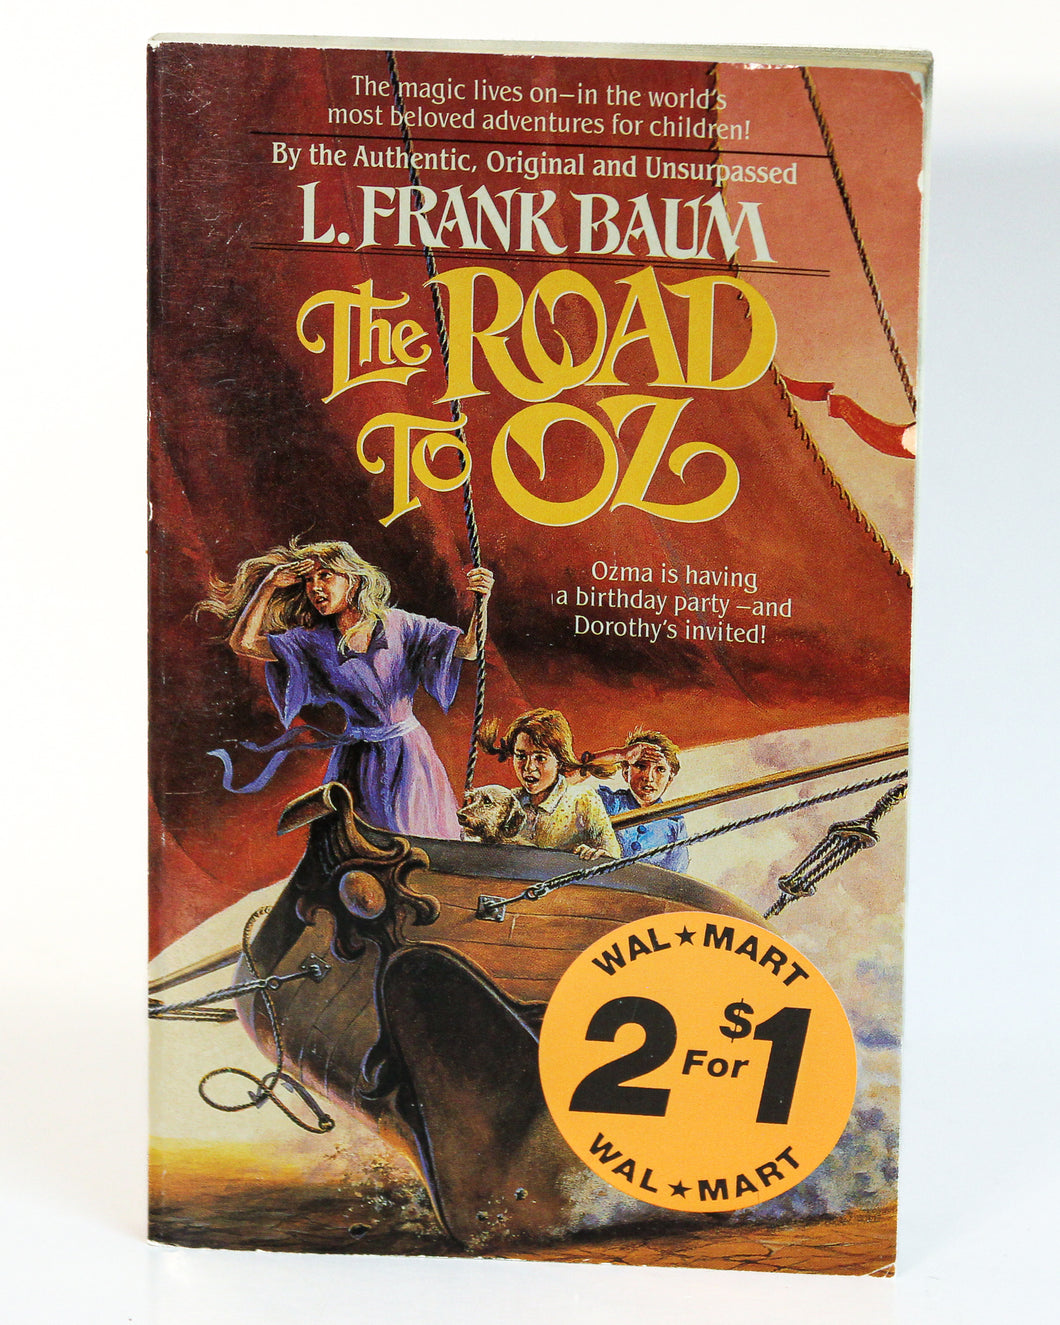 The Road to Oz by L. Frank Baum Rare Vintage Paperback Book Wes Lowe Aerie